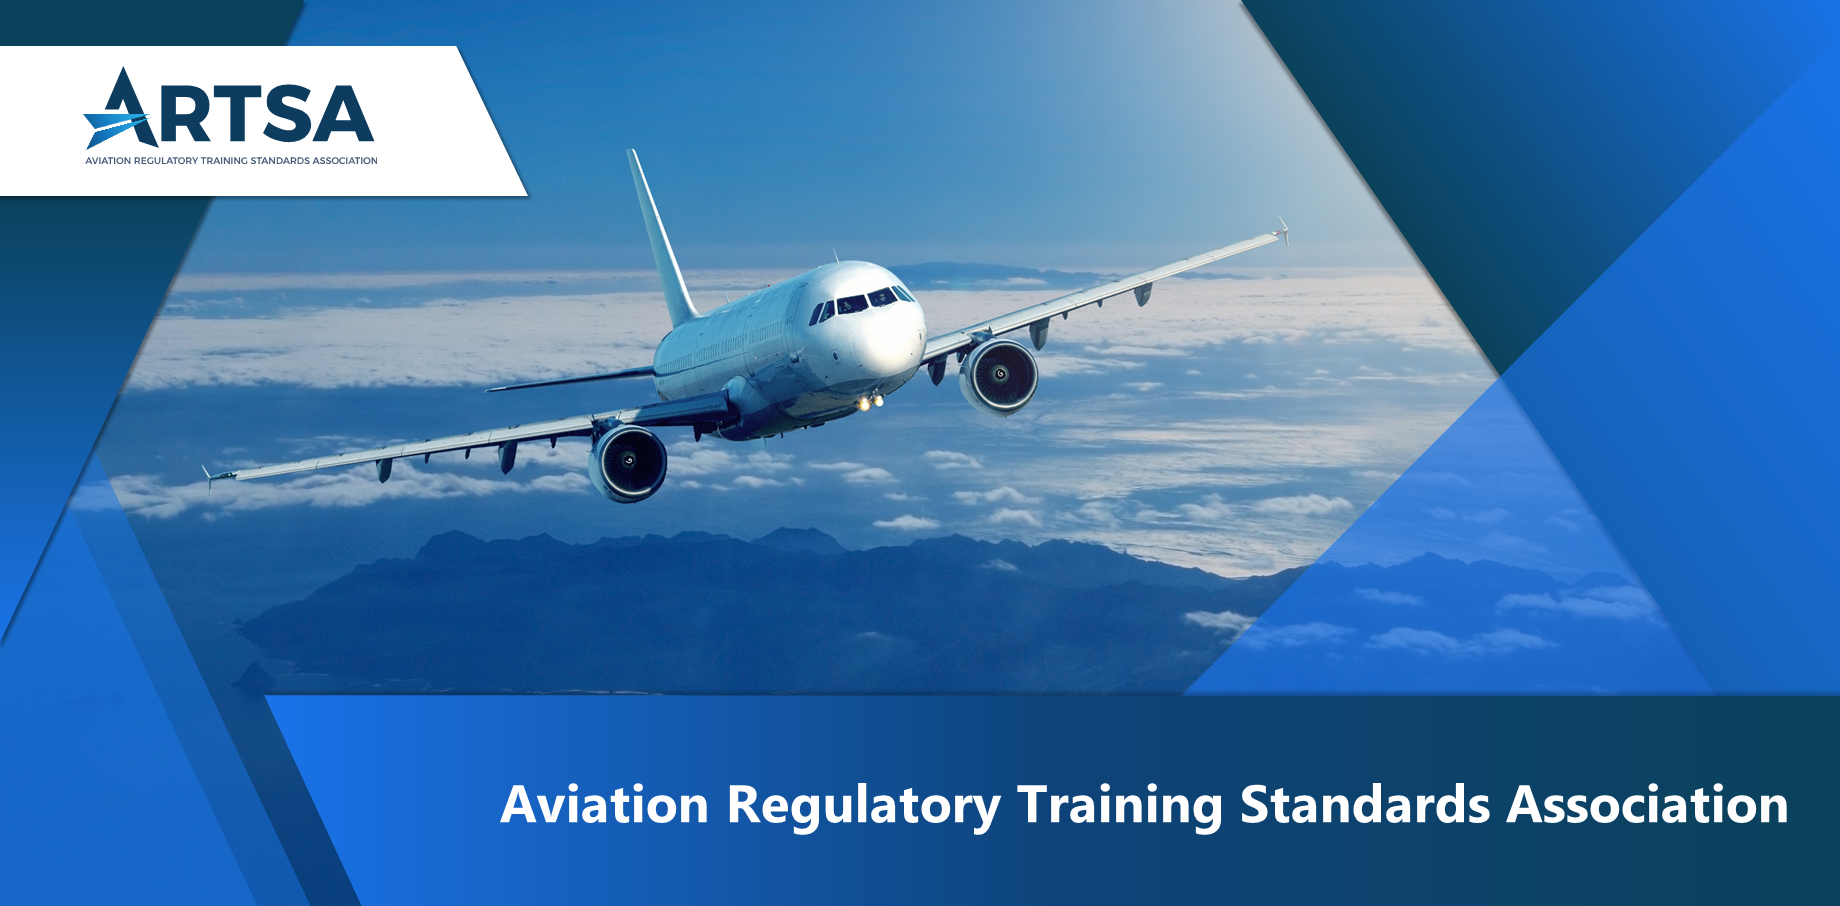 ARTSA is a non-profit organisation. With the primary objective of benefiting both its members and industry. By creating an association of aviation regulatory training organizations and continuing to engage collectively with the rigorous standards and regulatory training obligations set by EASA, the industry can further enhance its commitment to safety, efficiency, and innovation.